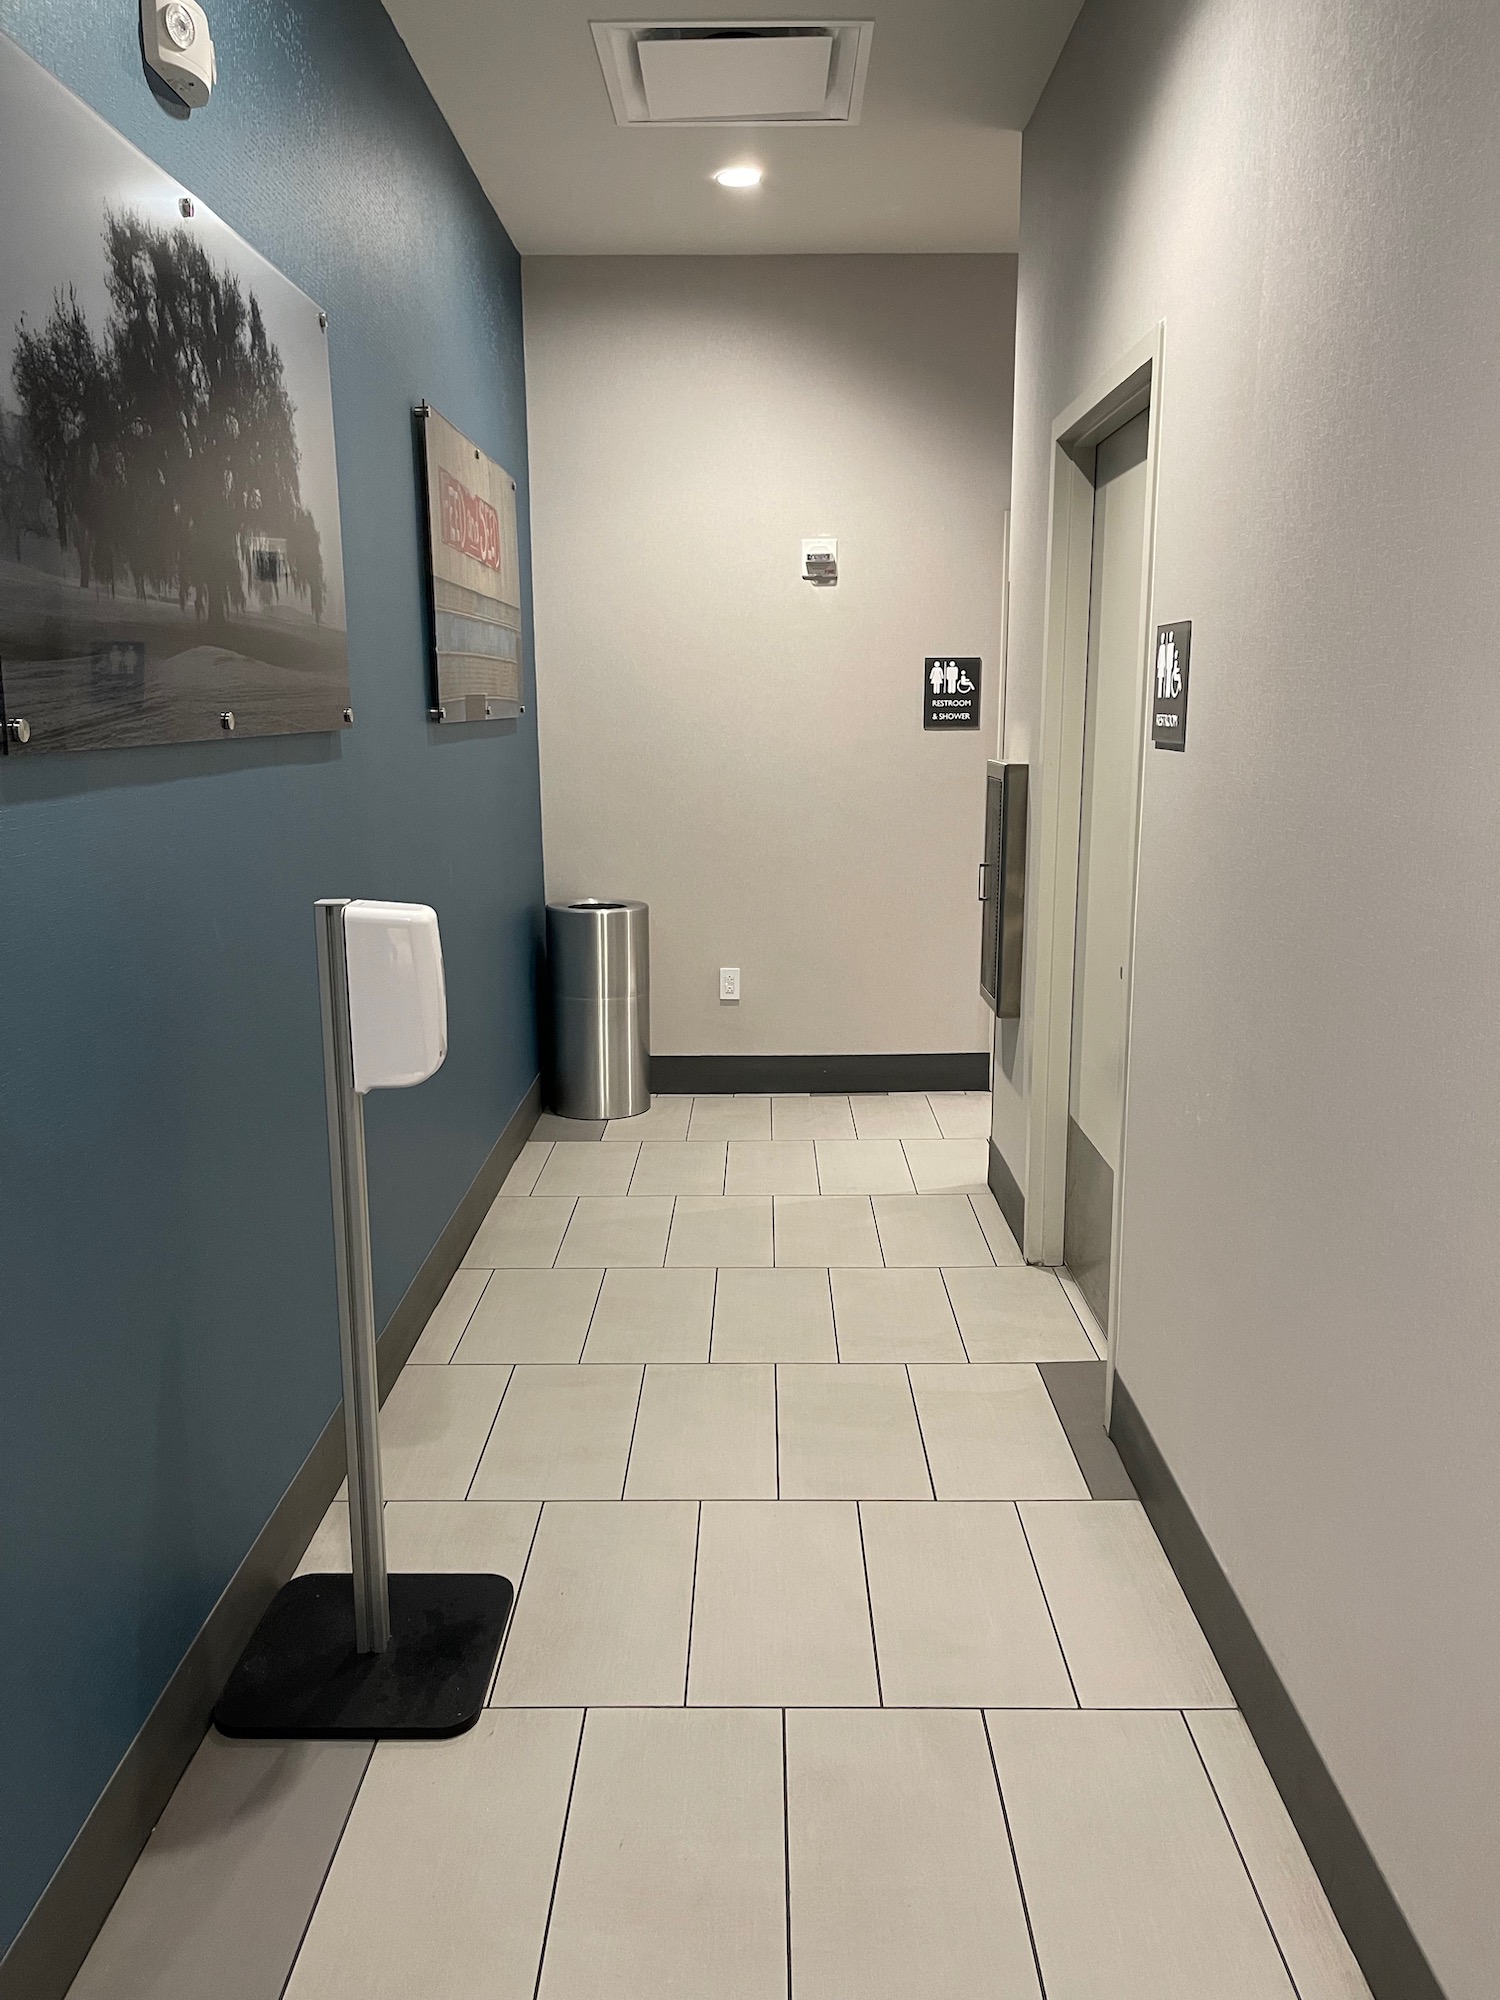 a hallway with a metal pole and a trash can